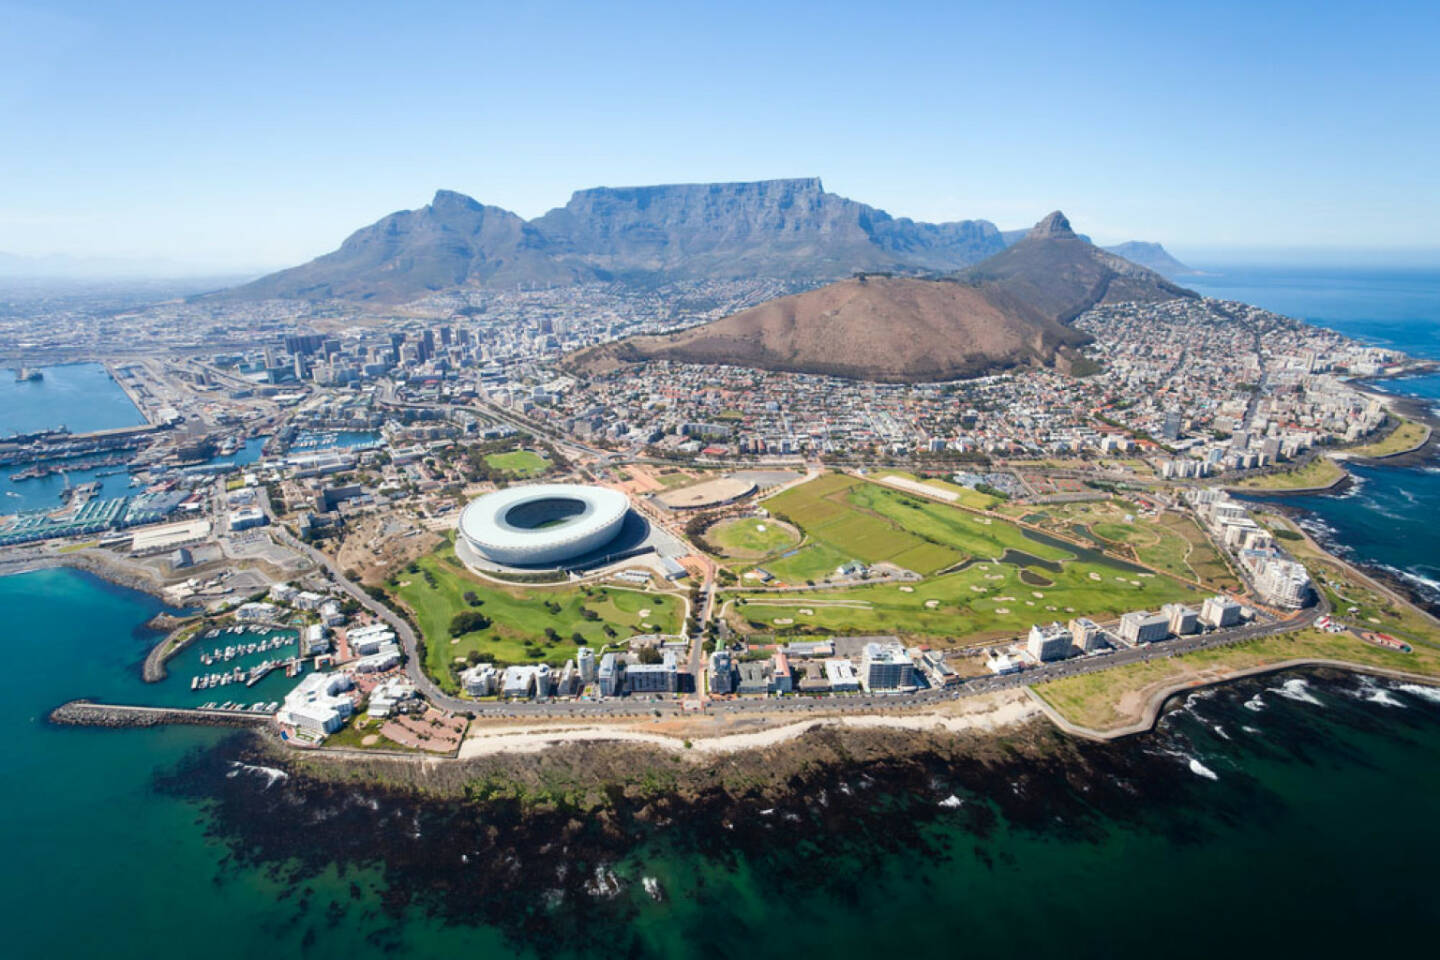 Kapstadt, Südafrika, http://www.shutterstock.com/de/pic-92510755/stock-photo-overall-aerial-view-of-cape-town-south-africa.html 